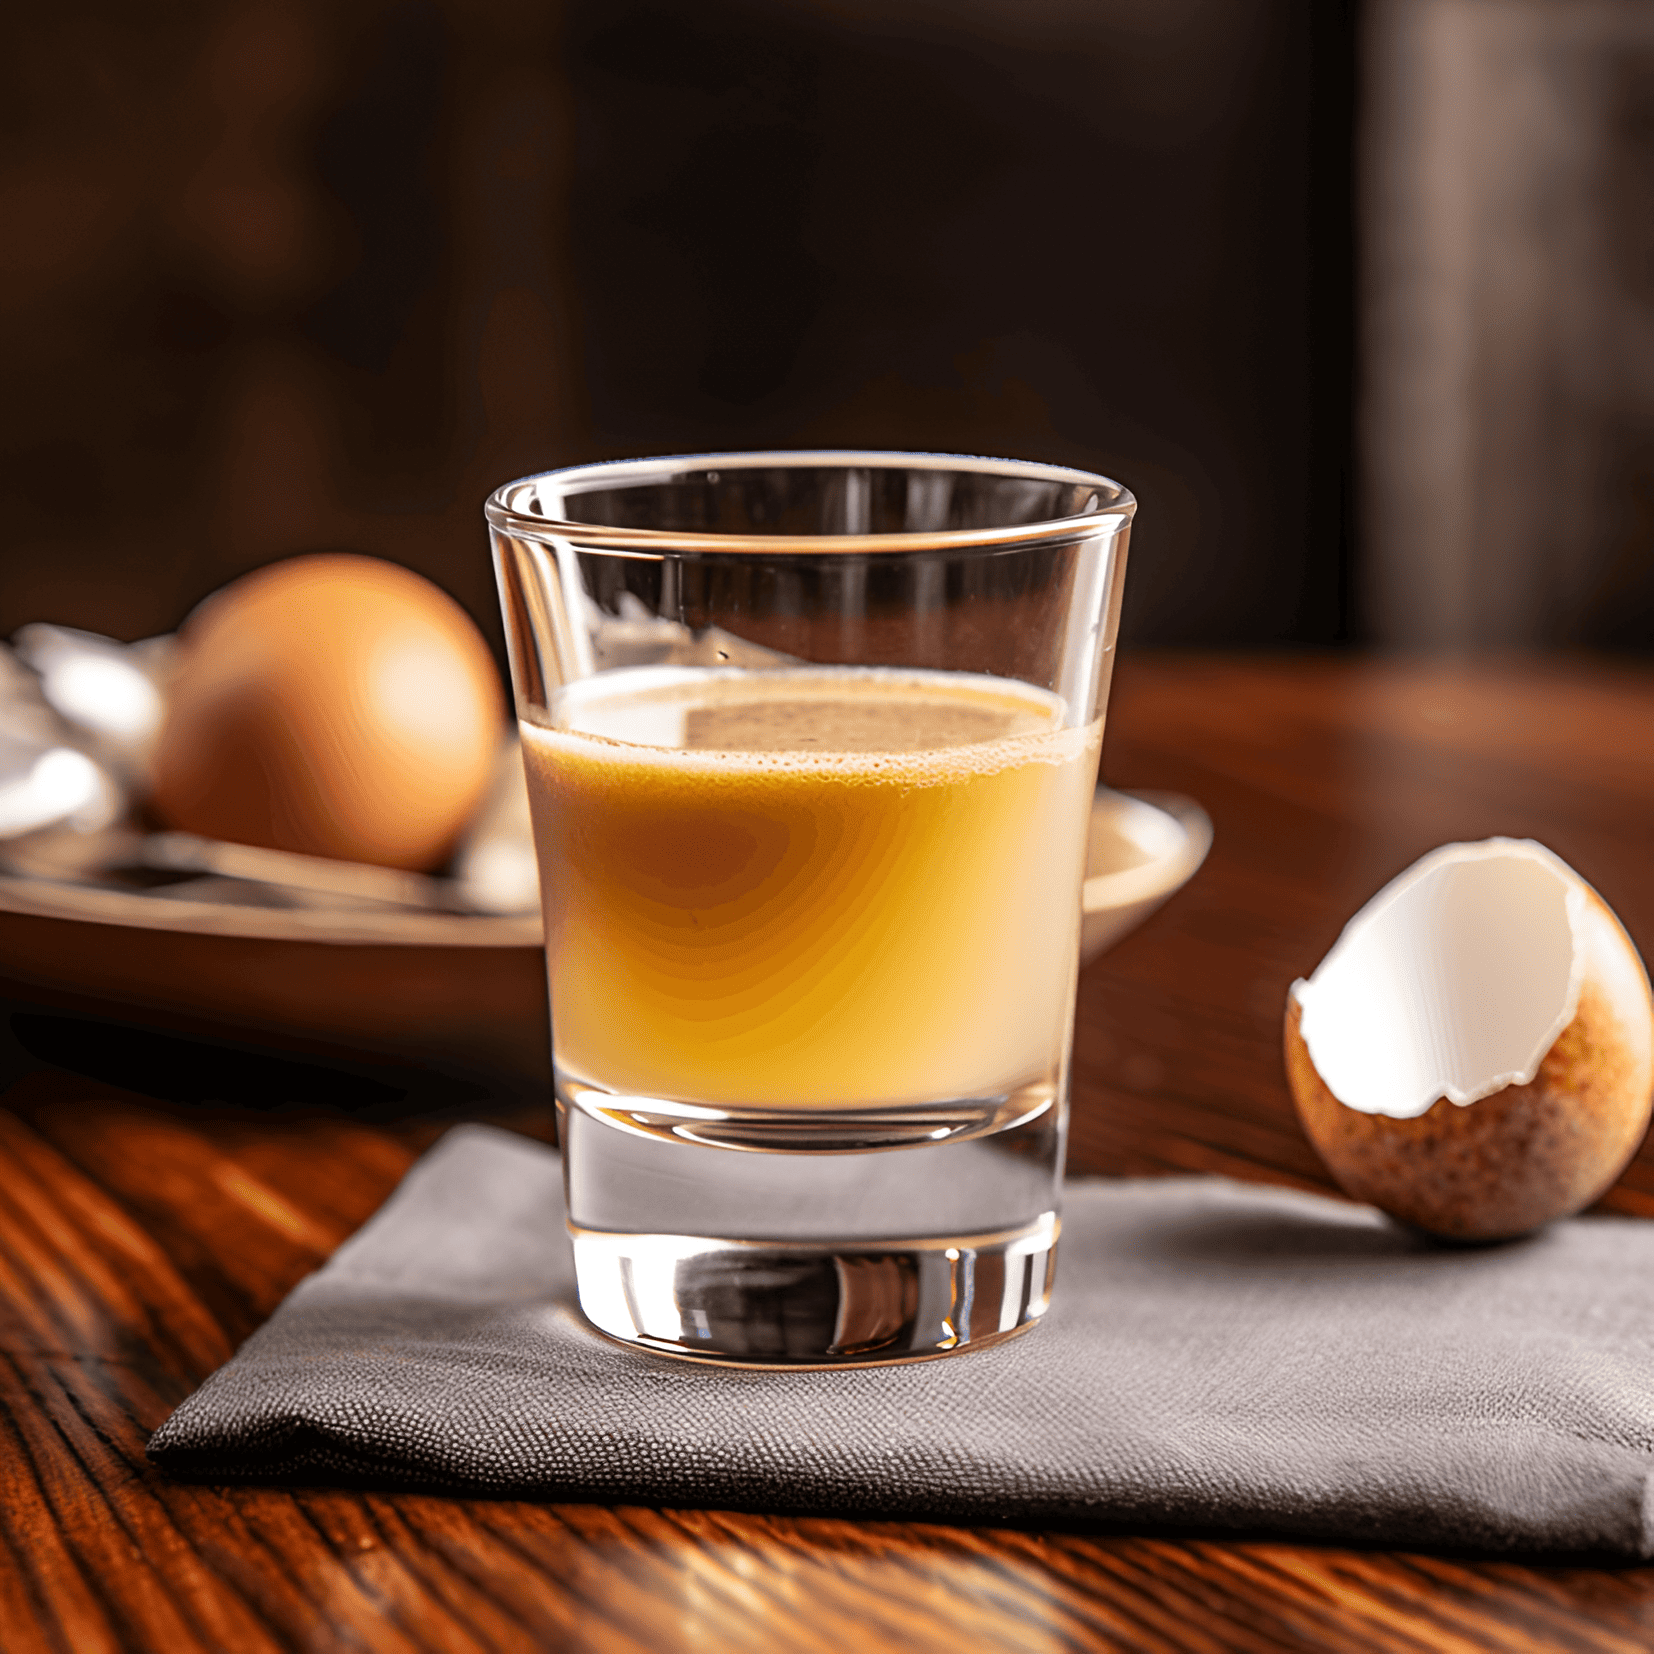 Prairie Oyster Cocktail Recipe - The Prairie Oyster cocktail is a savory, rich, and slightly spicy drink with a unique texture. The combination of the raw egg yolk, Worcestershire sauce, and hot sauce creates a velvety and bold flavor profile that is both satisfying and invigorating.